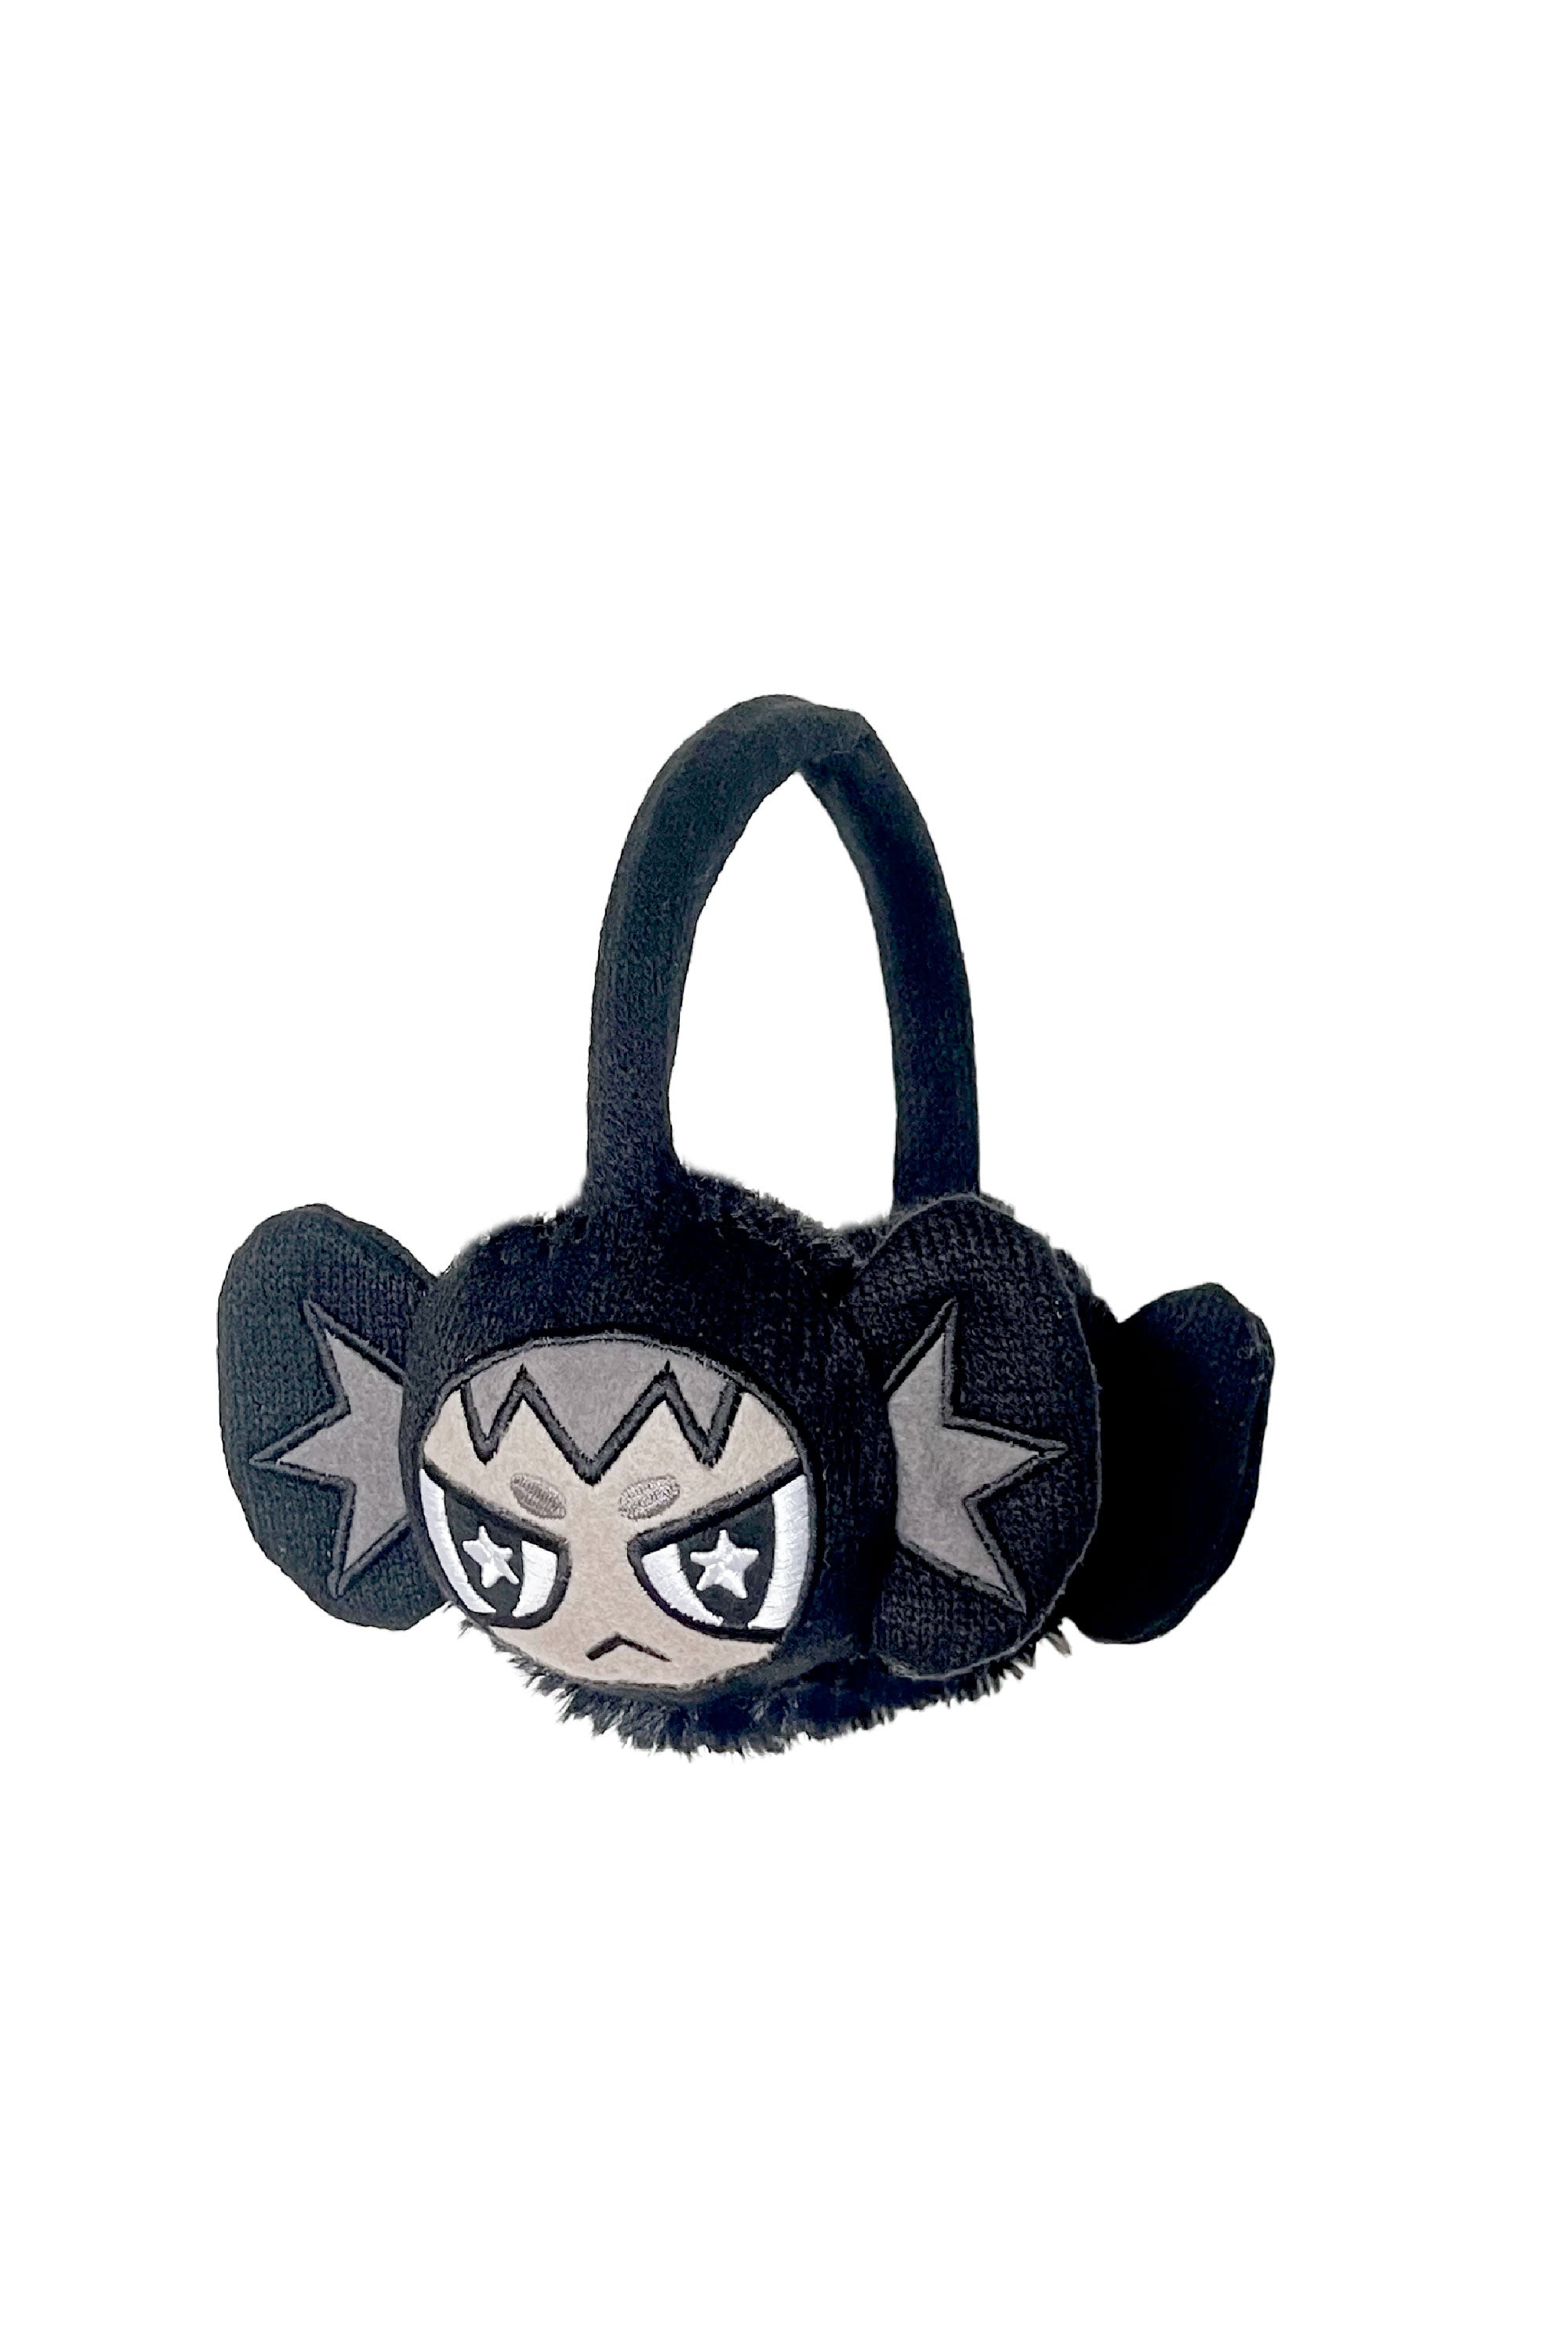 The HAPPY 99 - REM EARMUFFS BLACK available online with global shipping, and in PAM Stores Melbourne and Sydney.